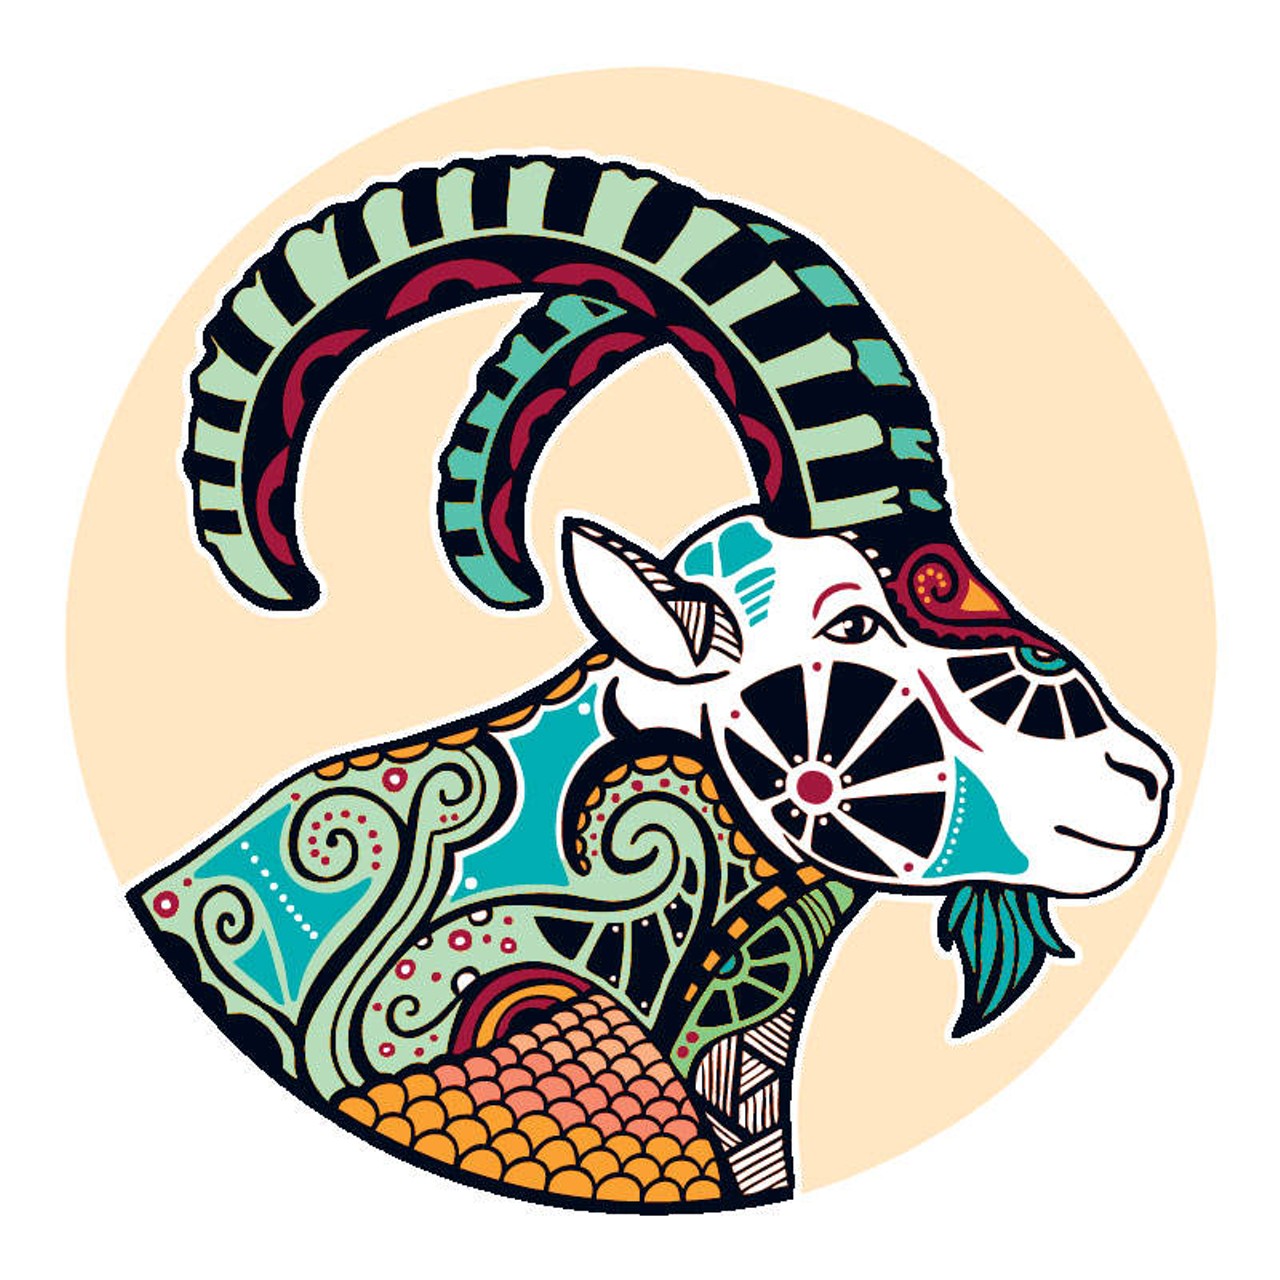 CAPRICORN (Dec. 21-Jan. 20): 
You guys are up and down. It&#146;s tough to predict for a wide range of issues when it comes to your sign. You&#146;re getting hit with the good, the bad, and the gnarly. It seems like there&#146;s a reprieve that is about to arrive hand in hand with an opportunity to heal old wounds, or ailments that have been hanging you up longer than usual. There could be good work opportunities that arrive with a benefit package of one sort or another. The right people appear to be there for you &#151; and everything hinges on your willingness to stay joyful, and move or change at the drop of a hat.